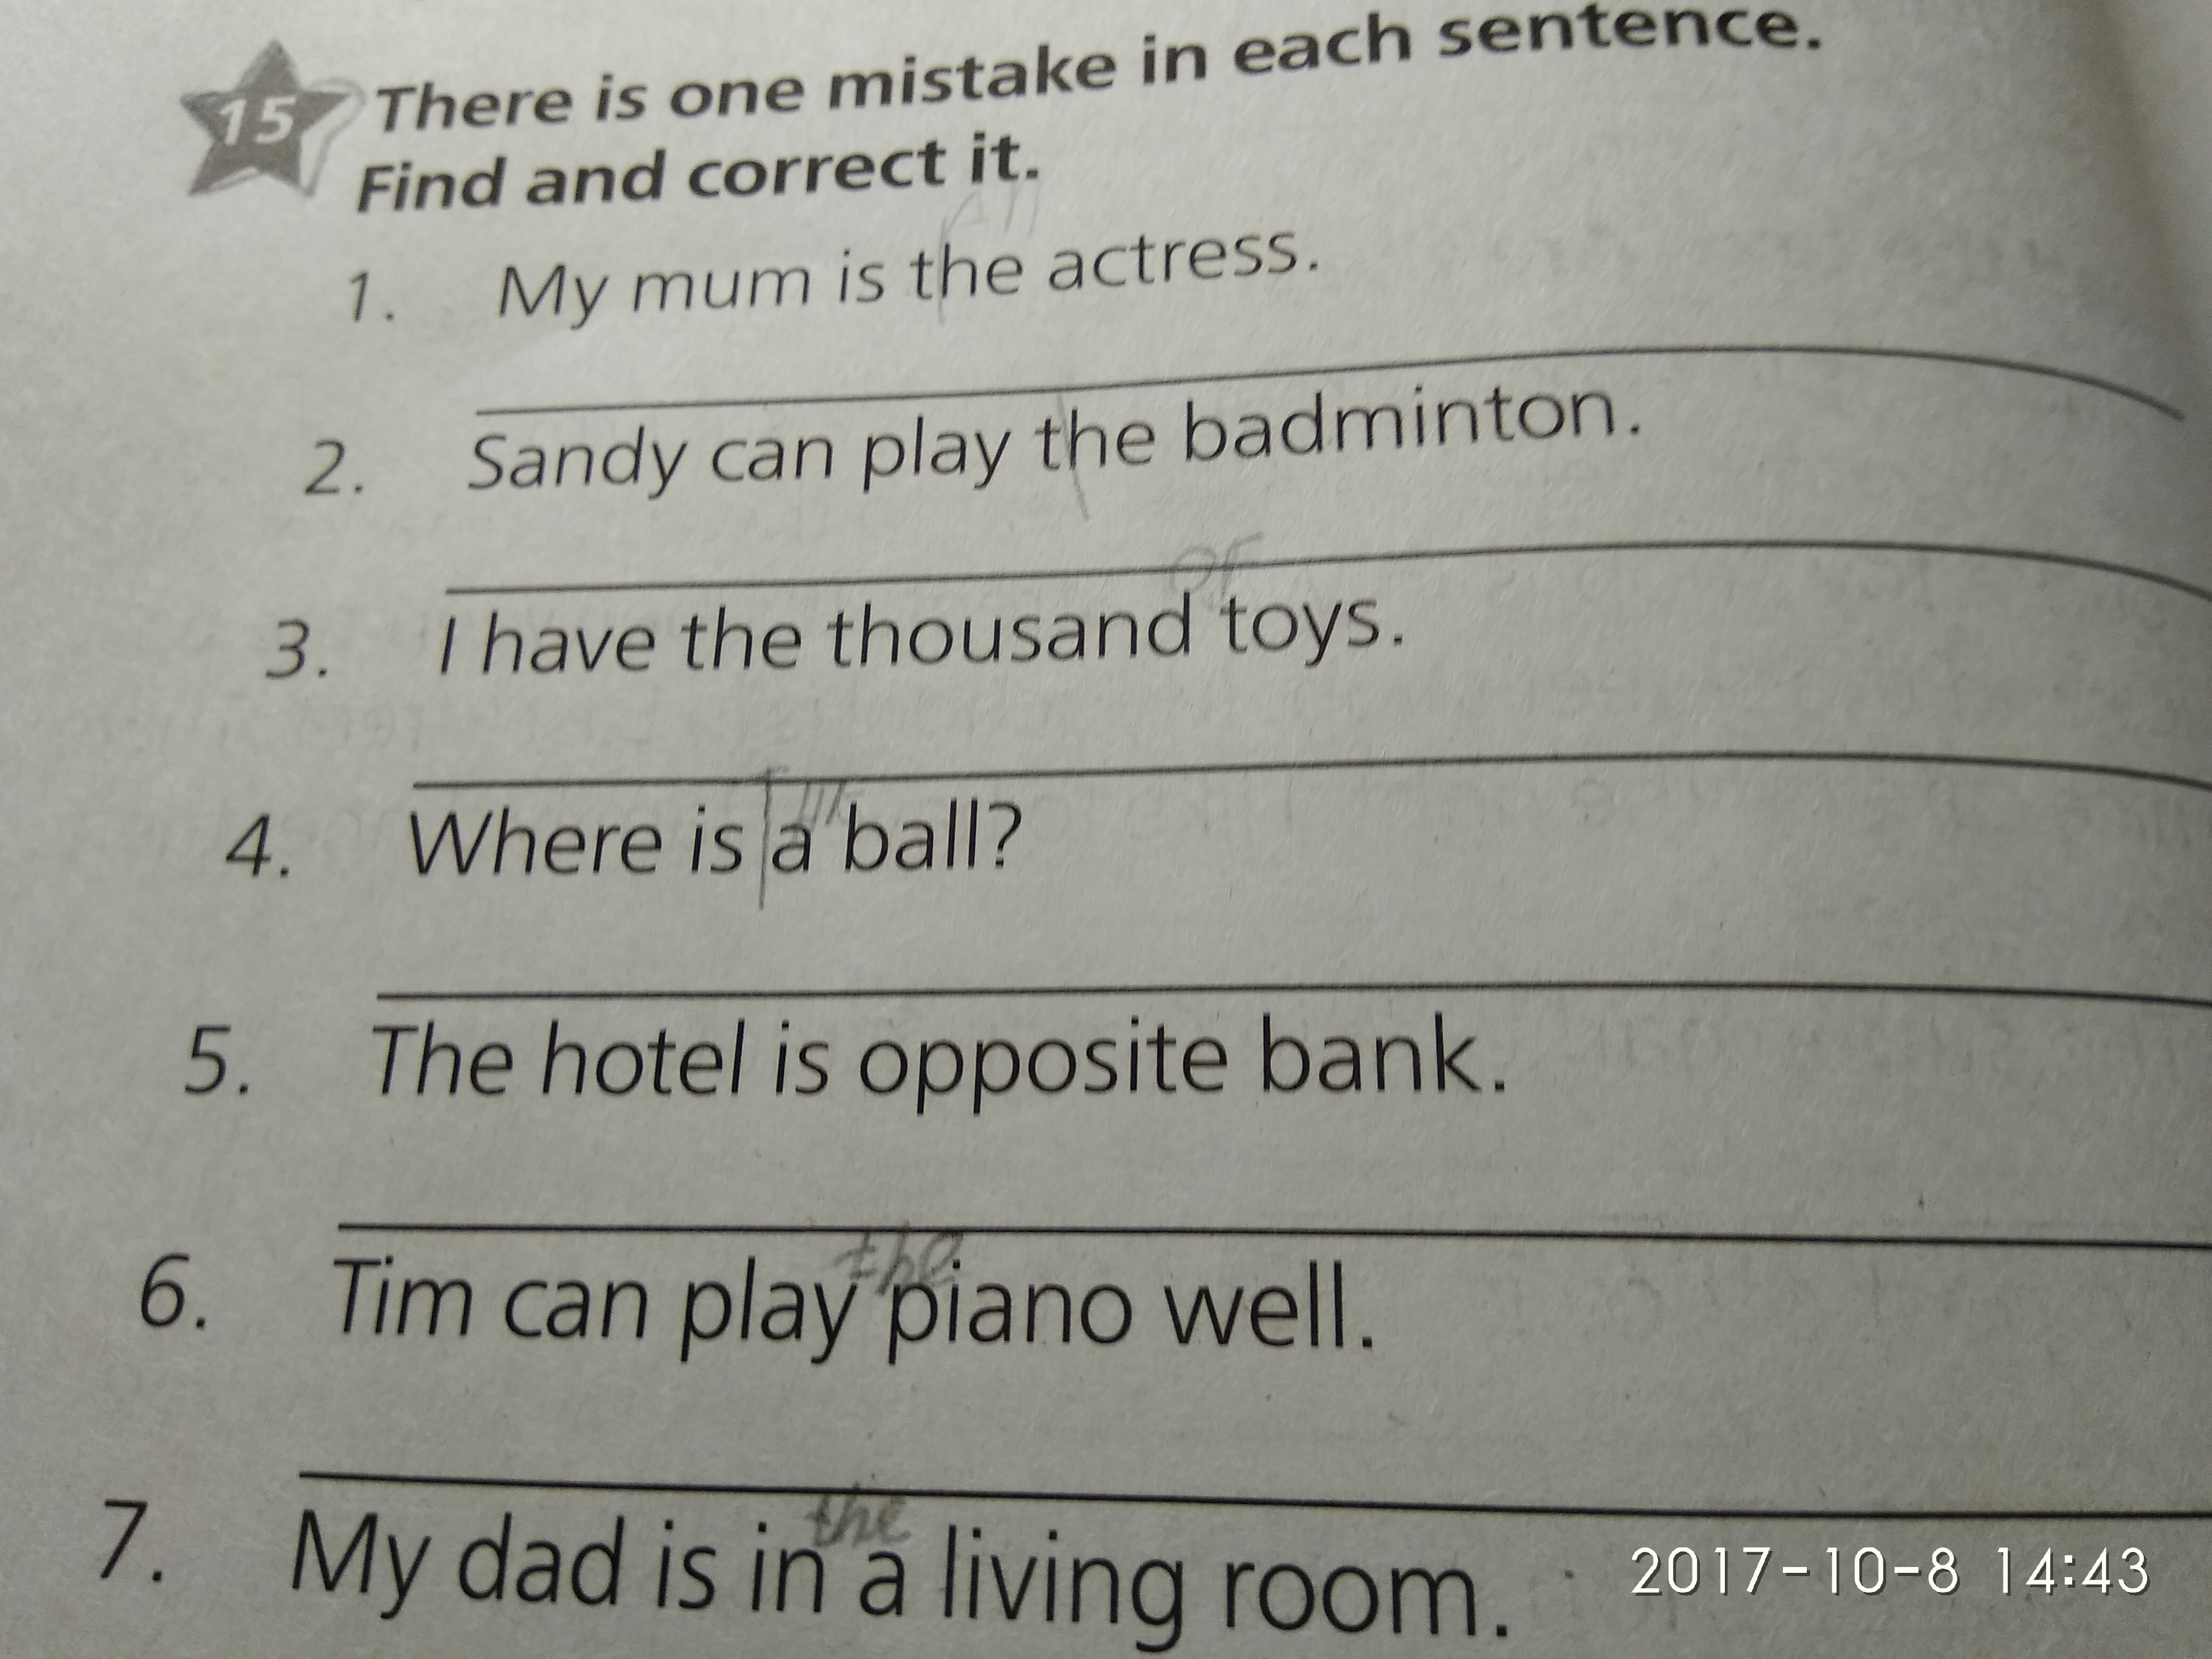 Find the mistake in each sentence